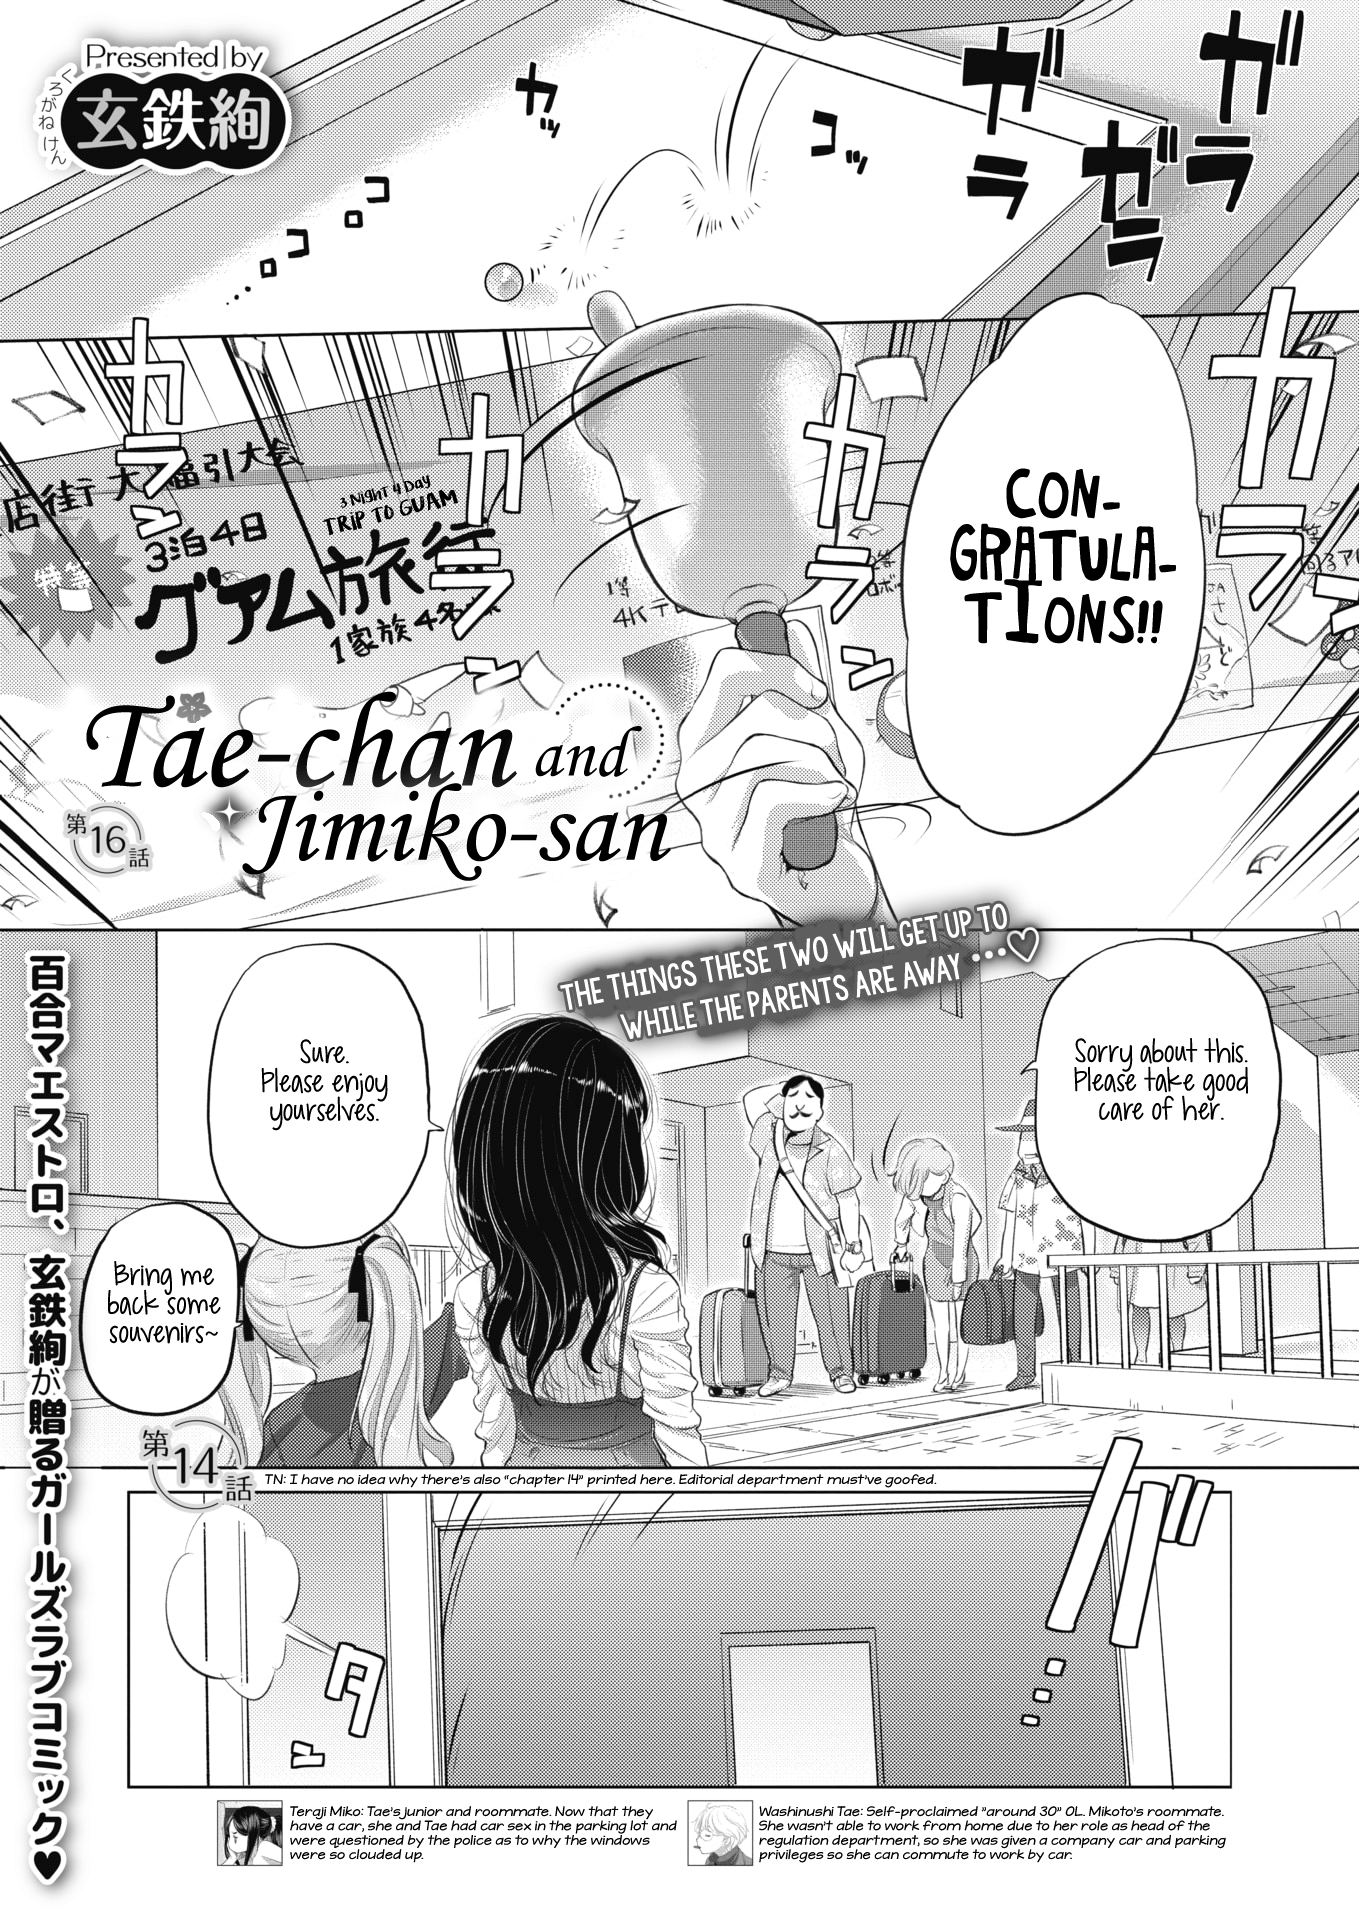 Tae-chan and Jimiko-san - Chapter 16 Page 1